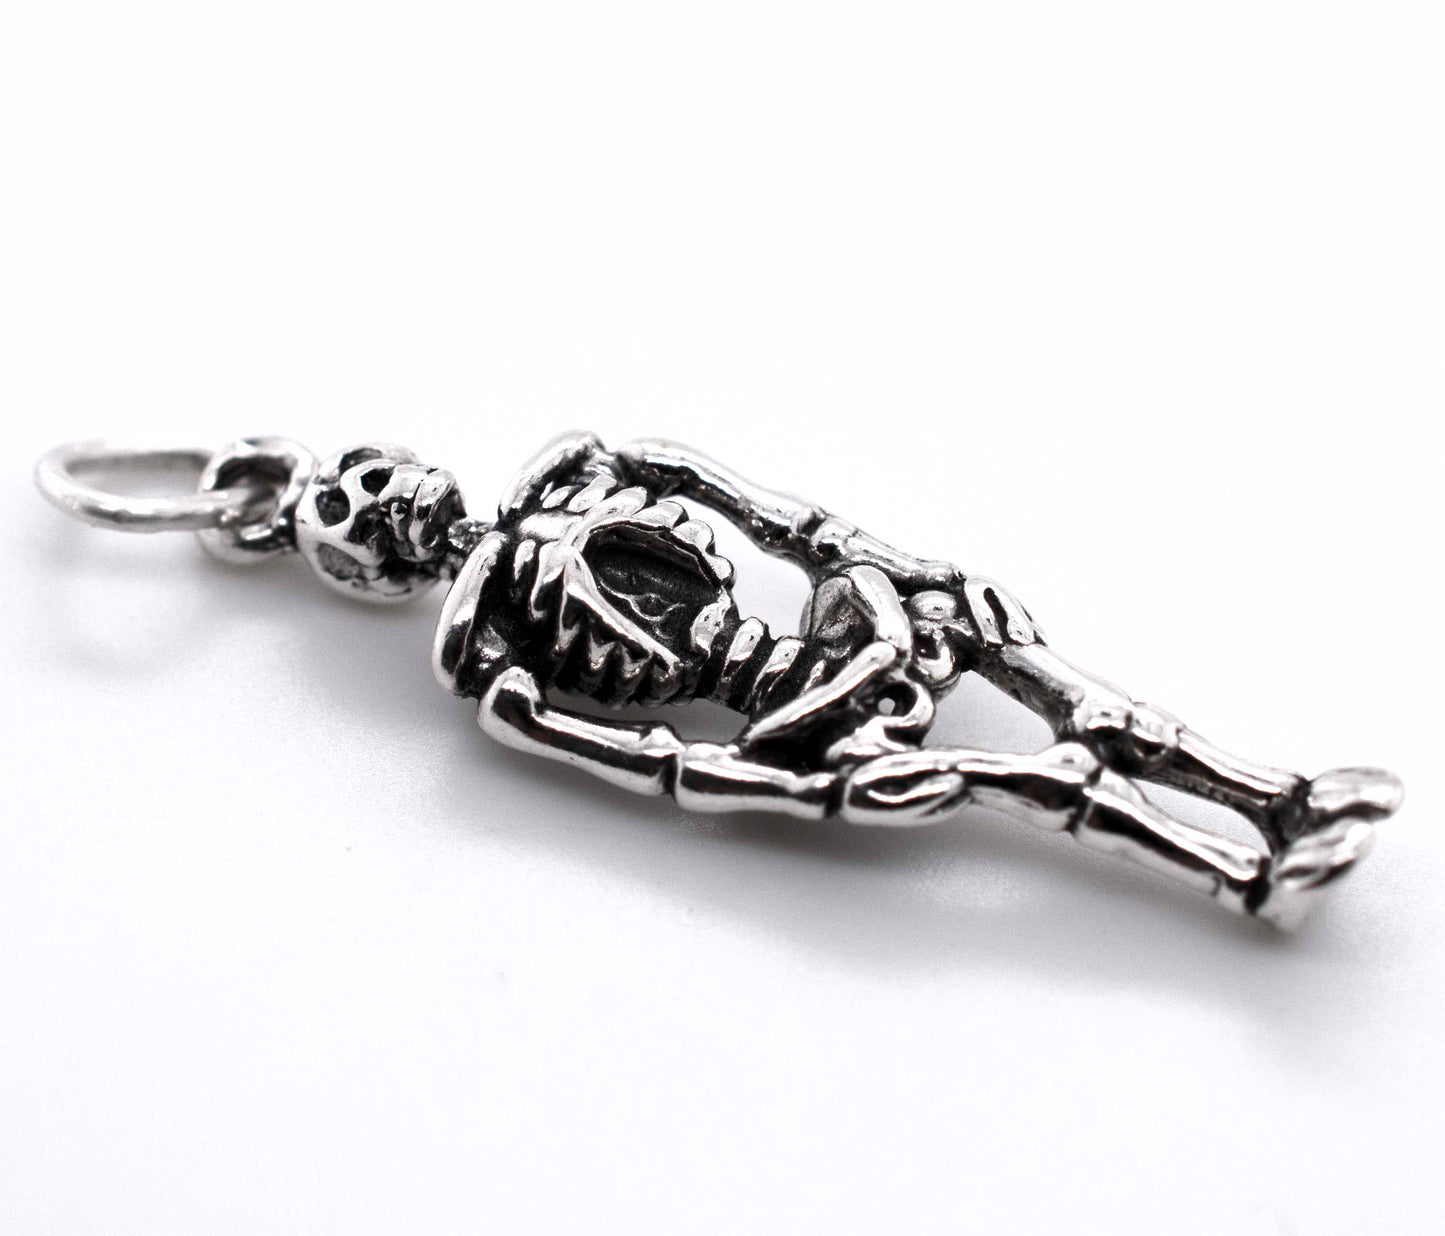 A Small Skeleton Charm by Super Silver on a white background.